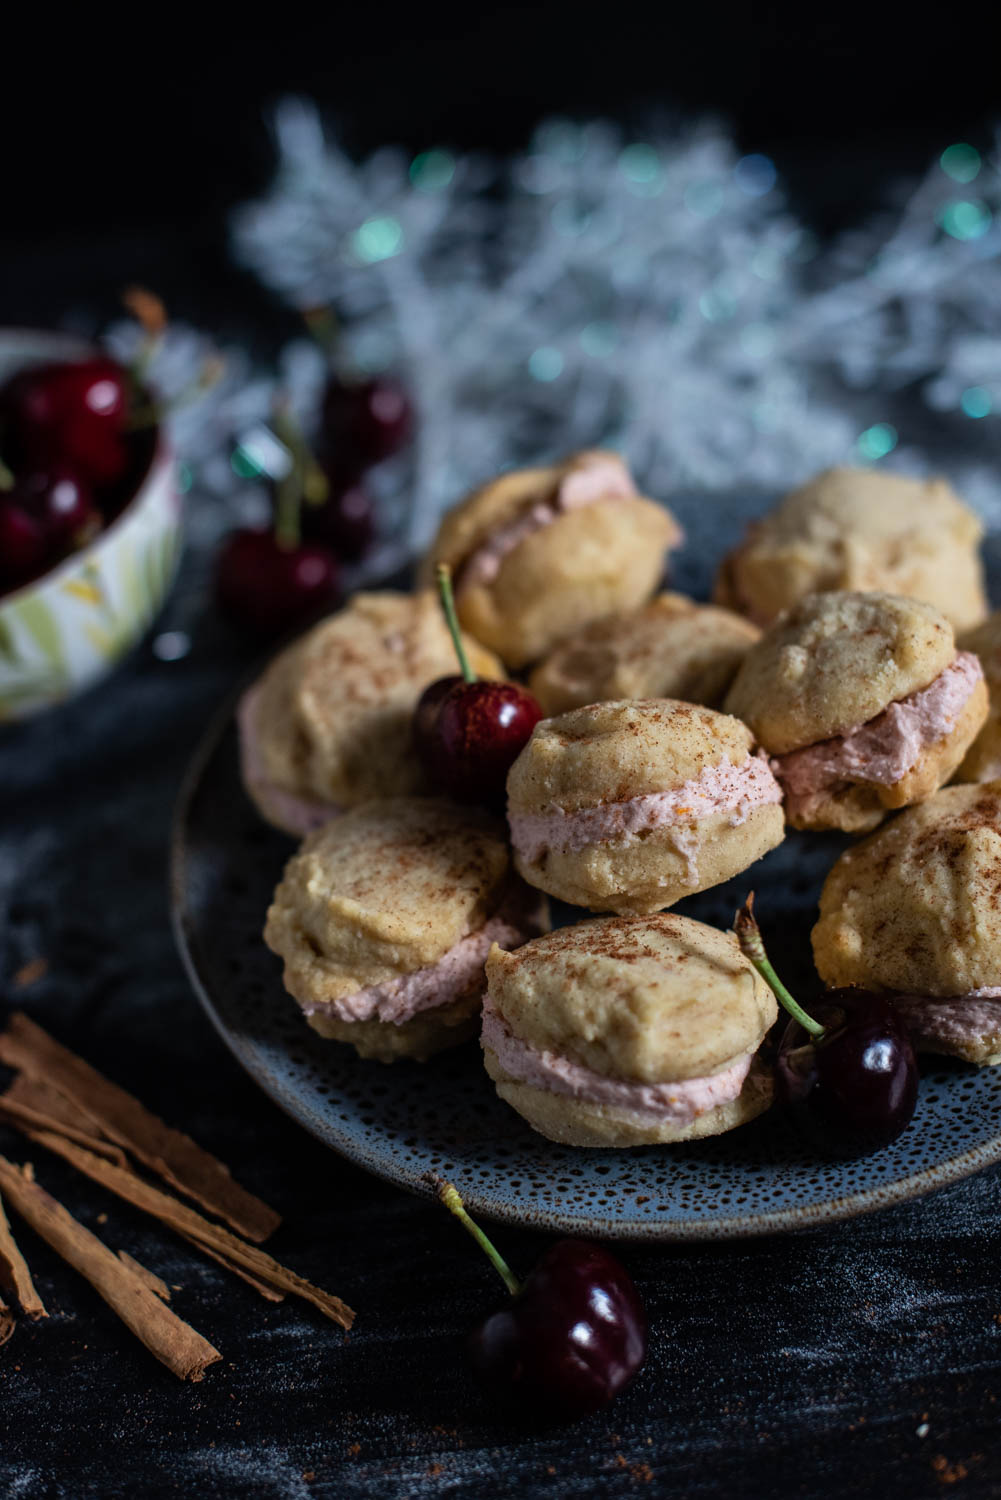 Cinnamon shortbread cookies with a creamy cherry filling surrounded by cherries on a plate with moody lighting